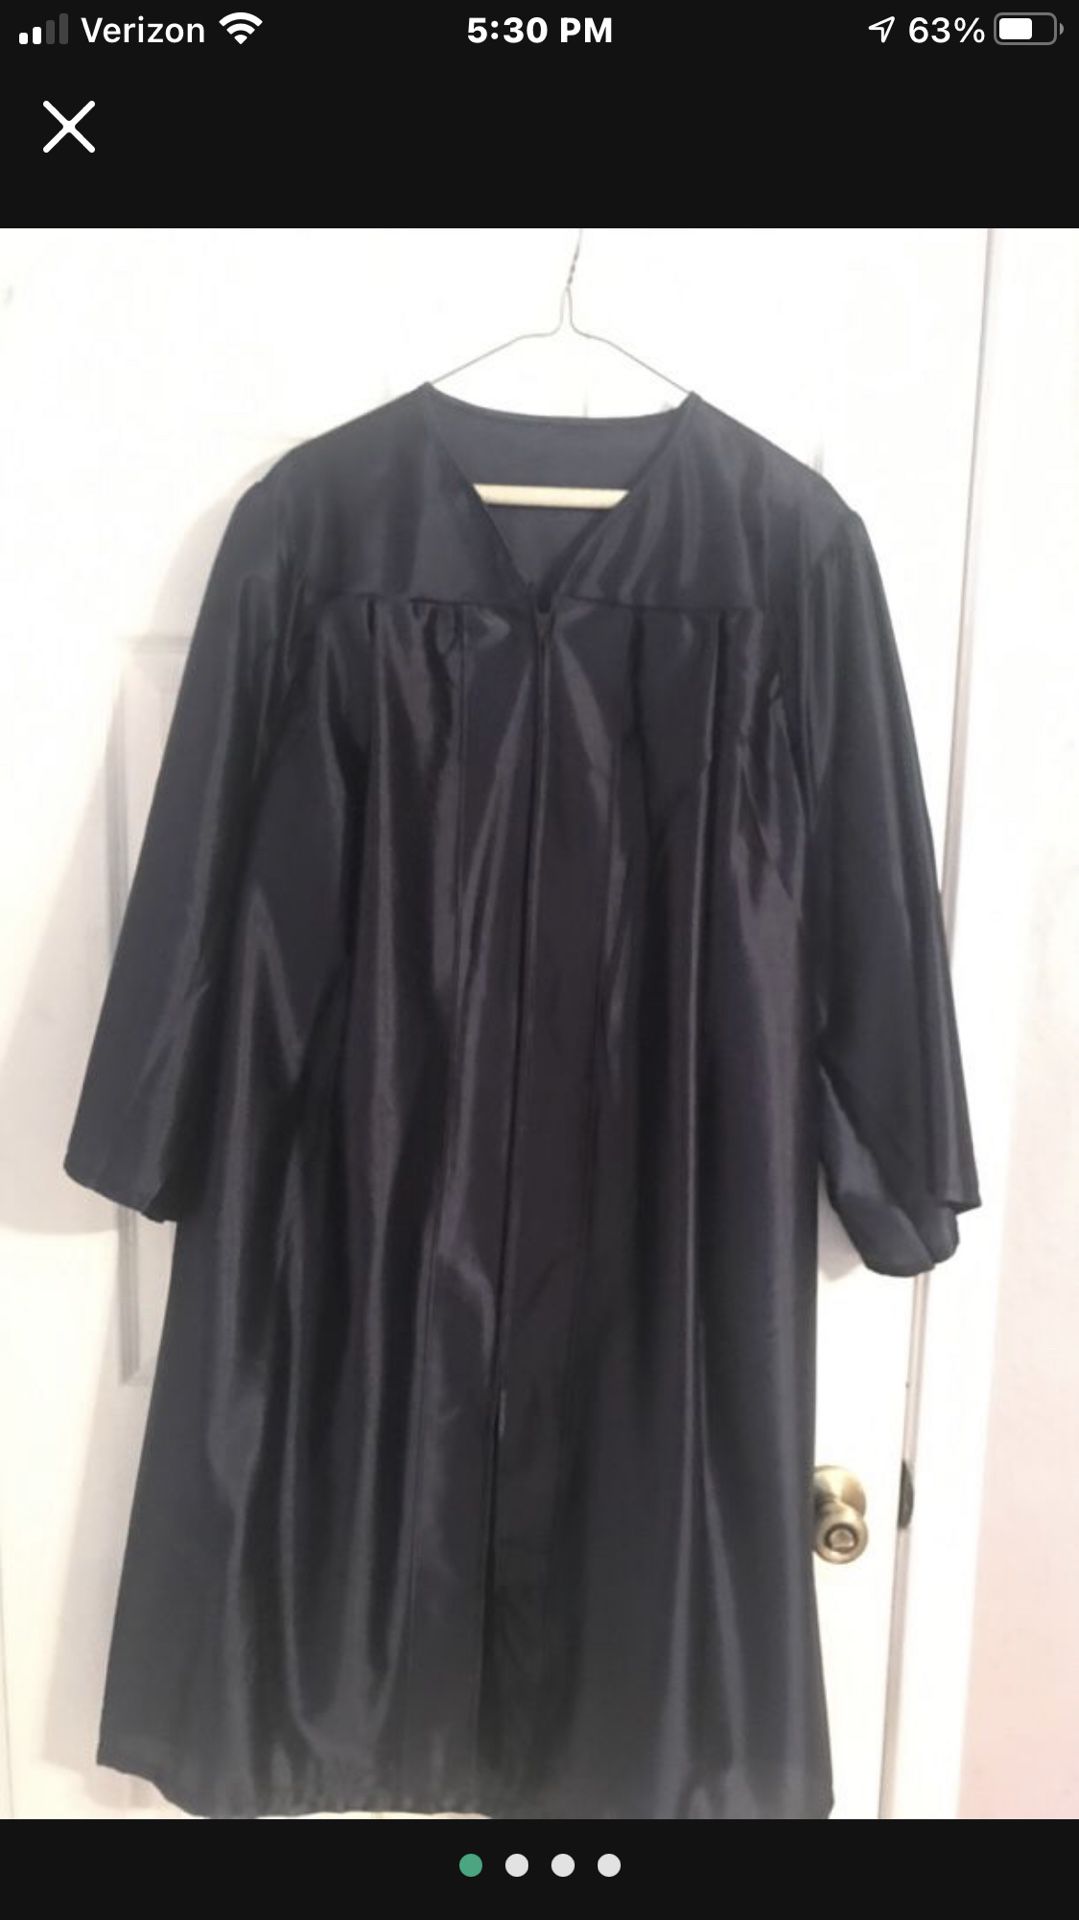 Tampa Bay Tech graduation gown or HCC  gown